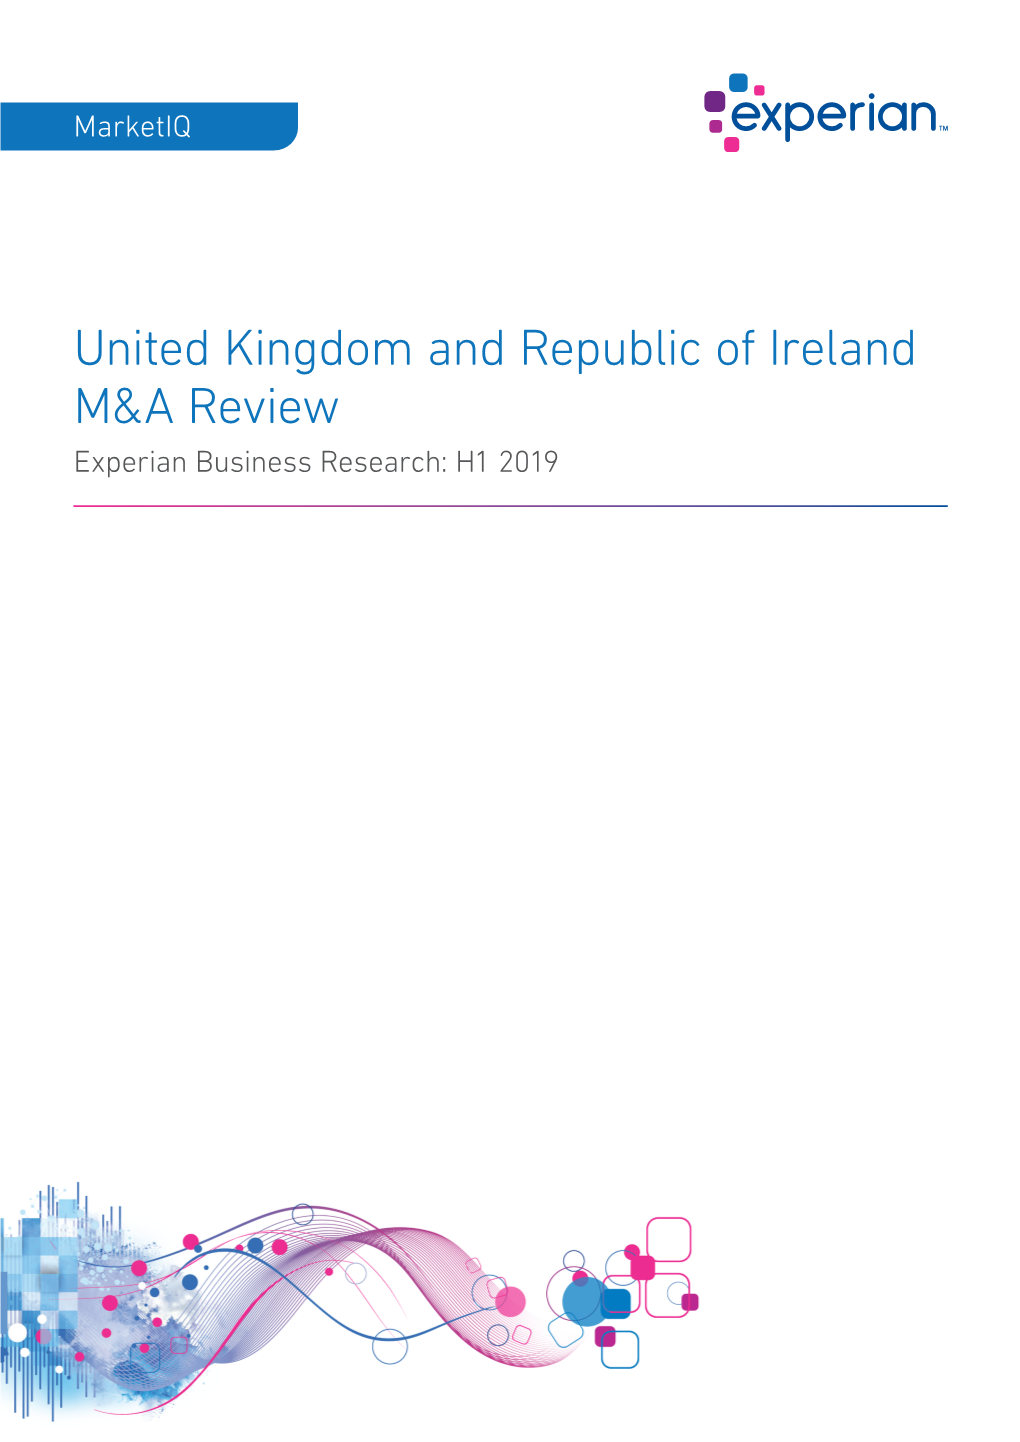 United Kingdom and Republic of Ireland M&A Review